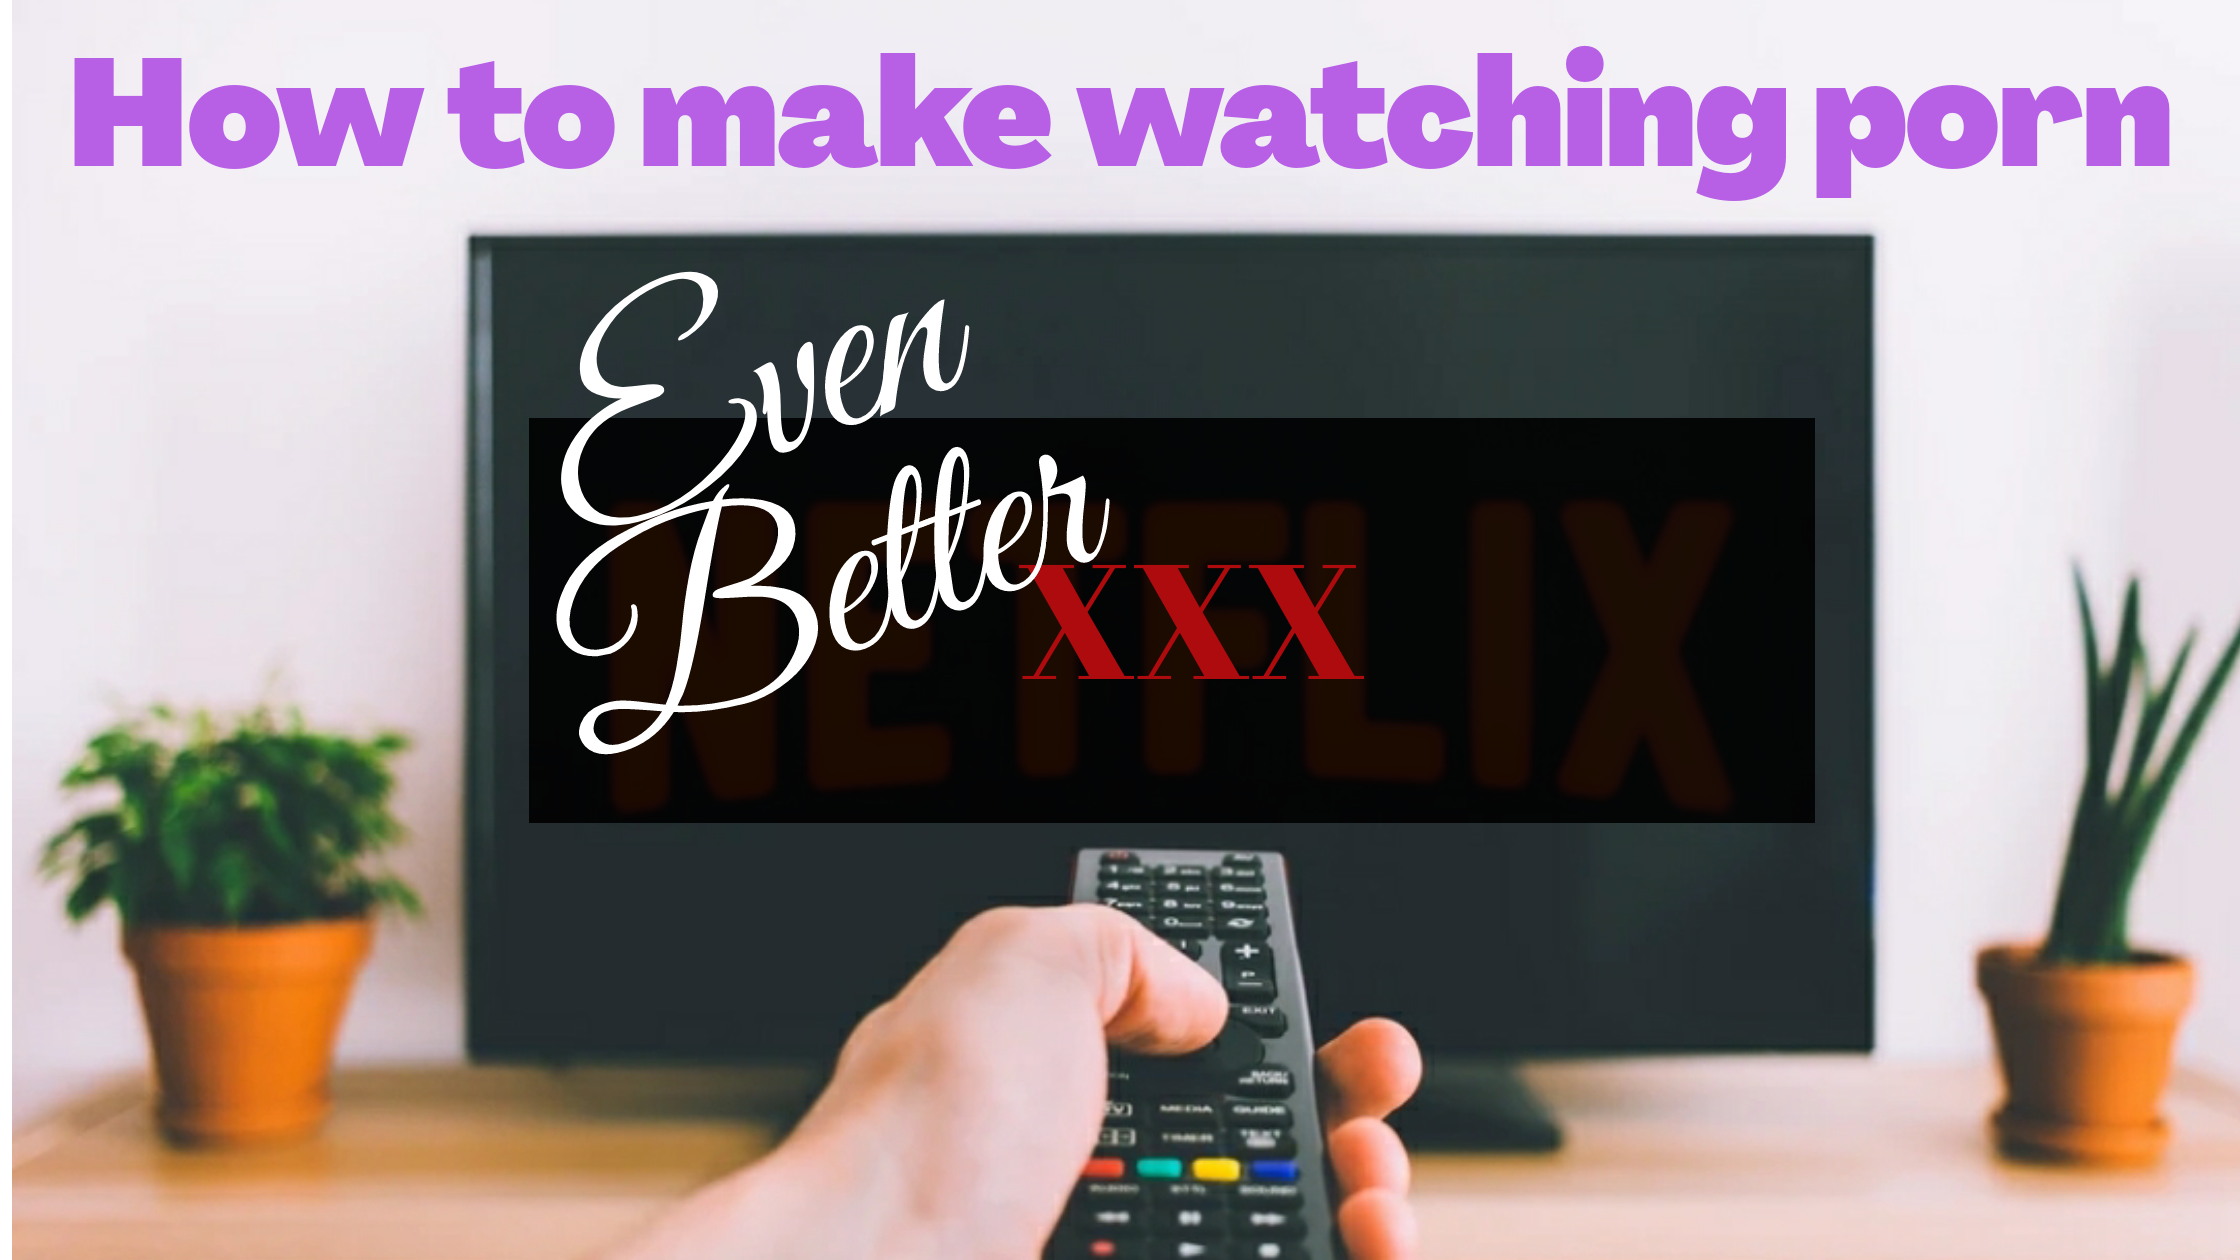 How to make watching porn even better dildo or dildont